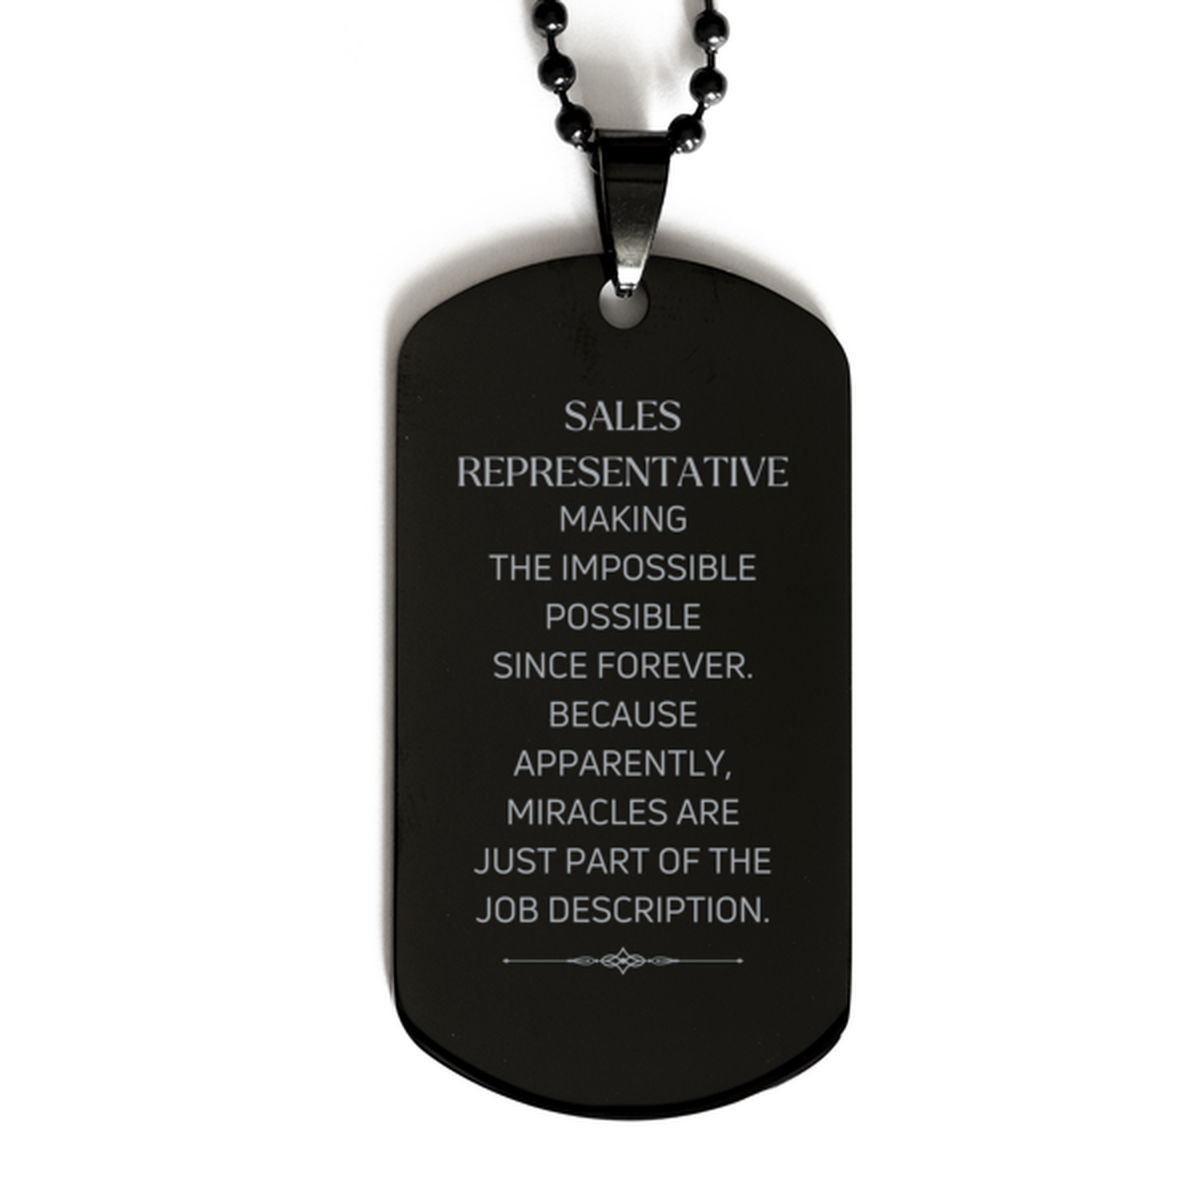 Funny Sales Representative Gifts, Miracles are just part of the job description, Inspirational Birthday Black Dog Tag For Sales Representative, Men, Women, Coworkers, Friends, Boss